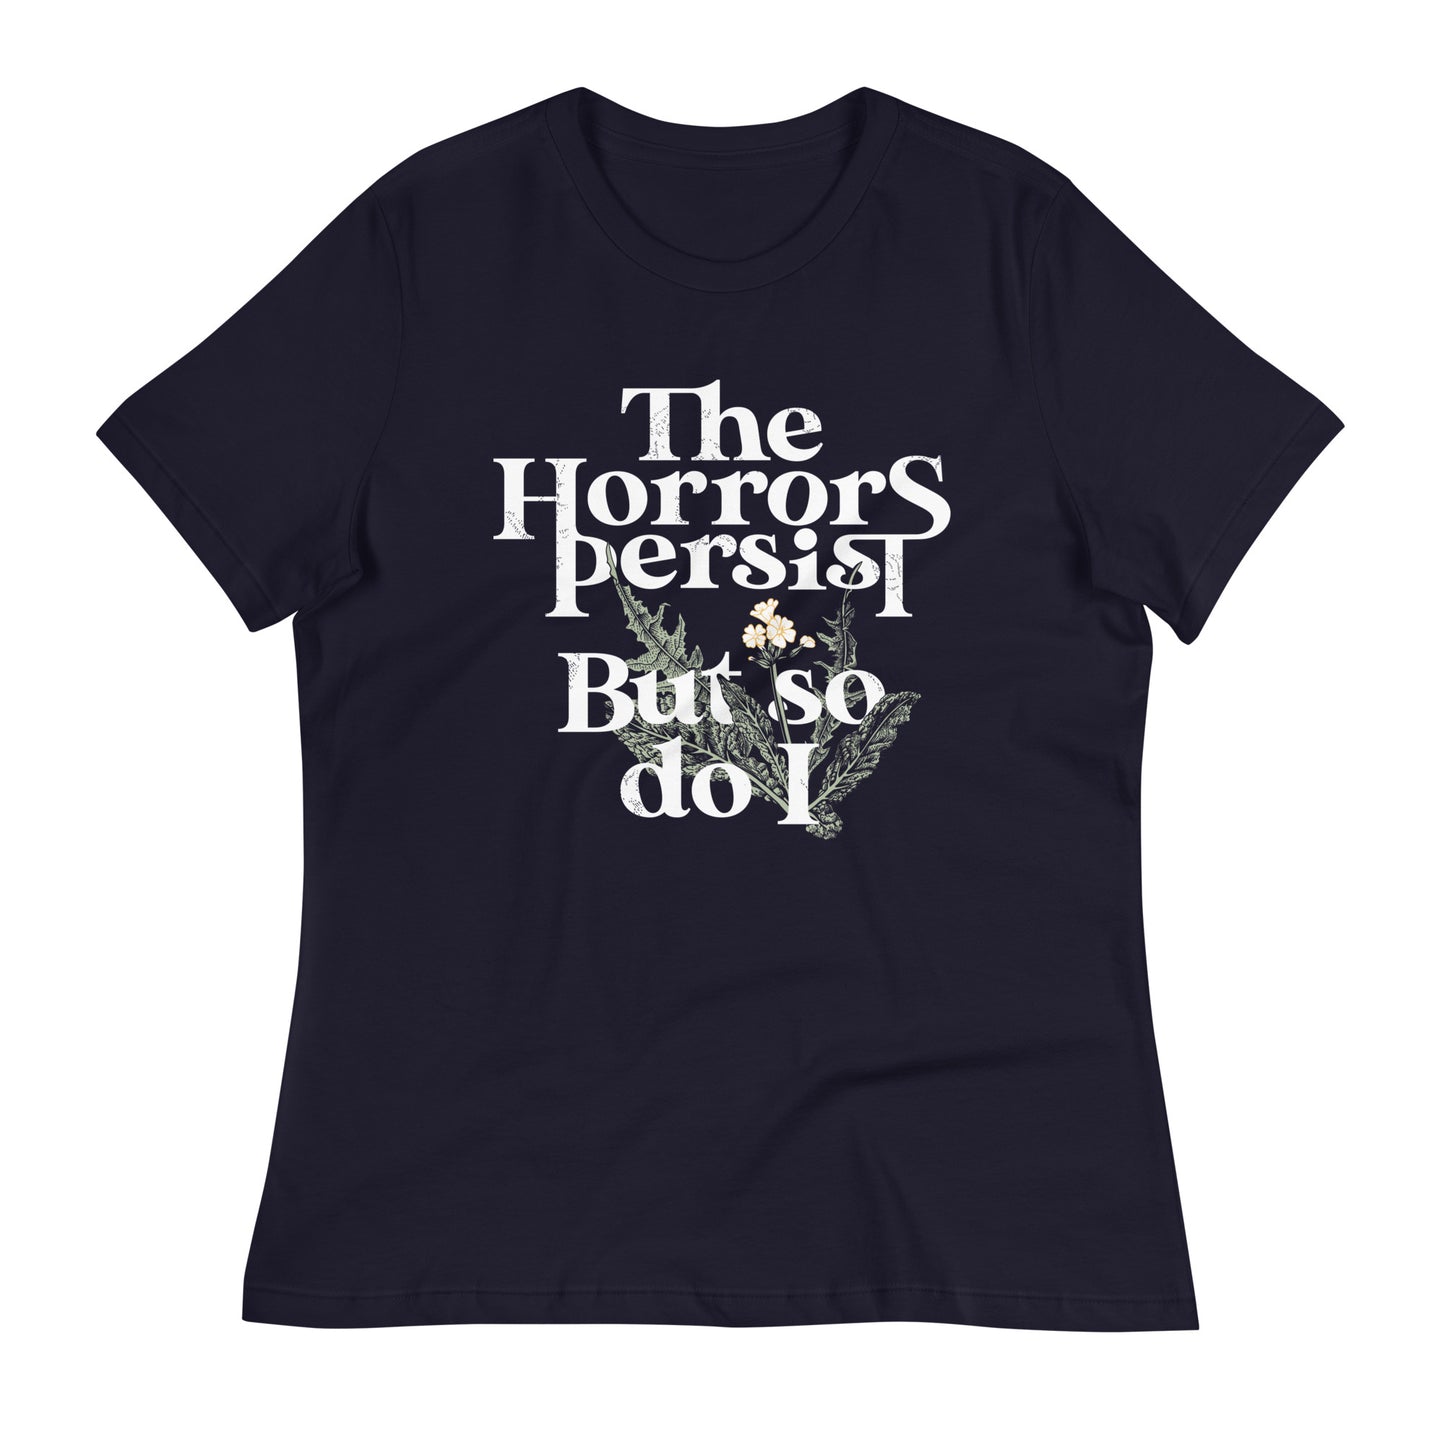 The Horrors Persist But So Do I Women's Signature Tee